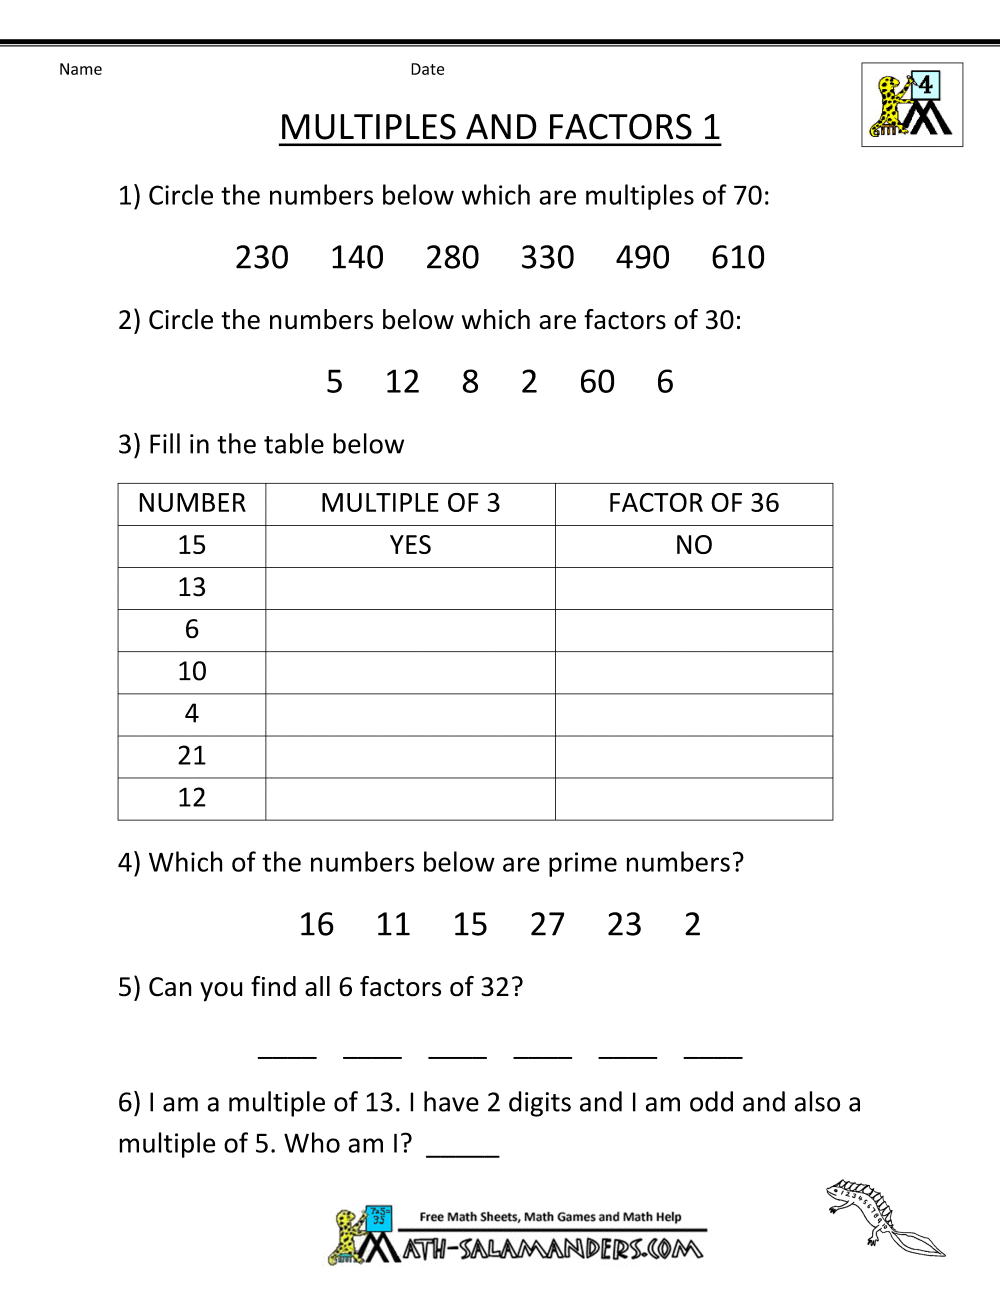 factors-and-multiples-worksheets